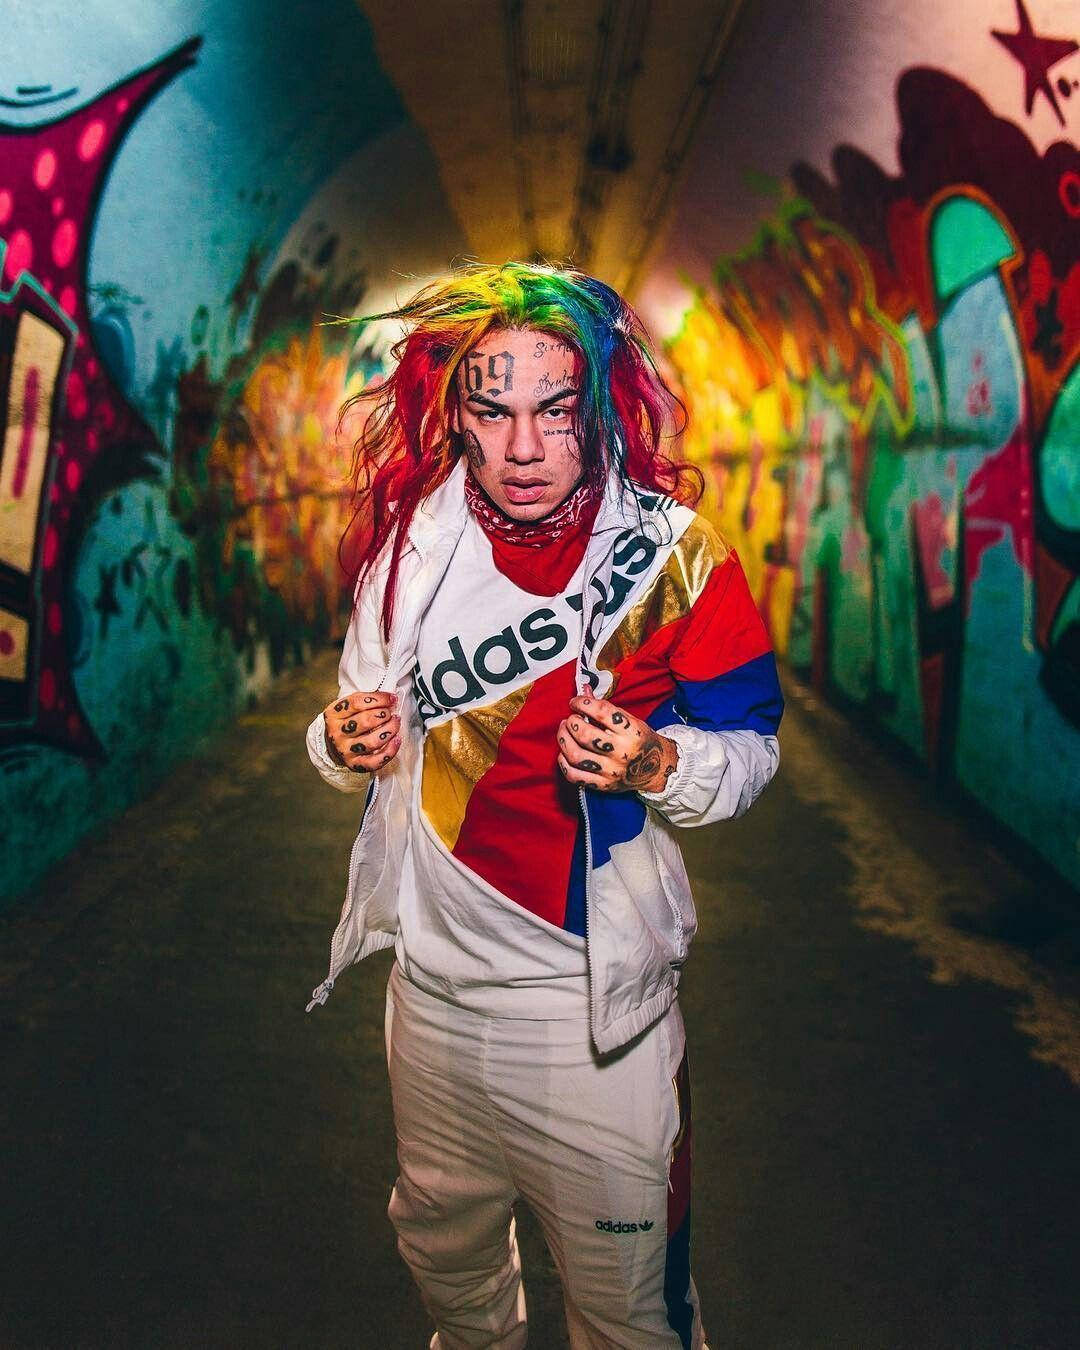 6ix9ine Addidas Outfit Wallpaper